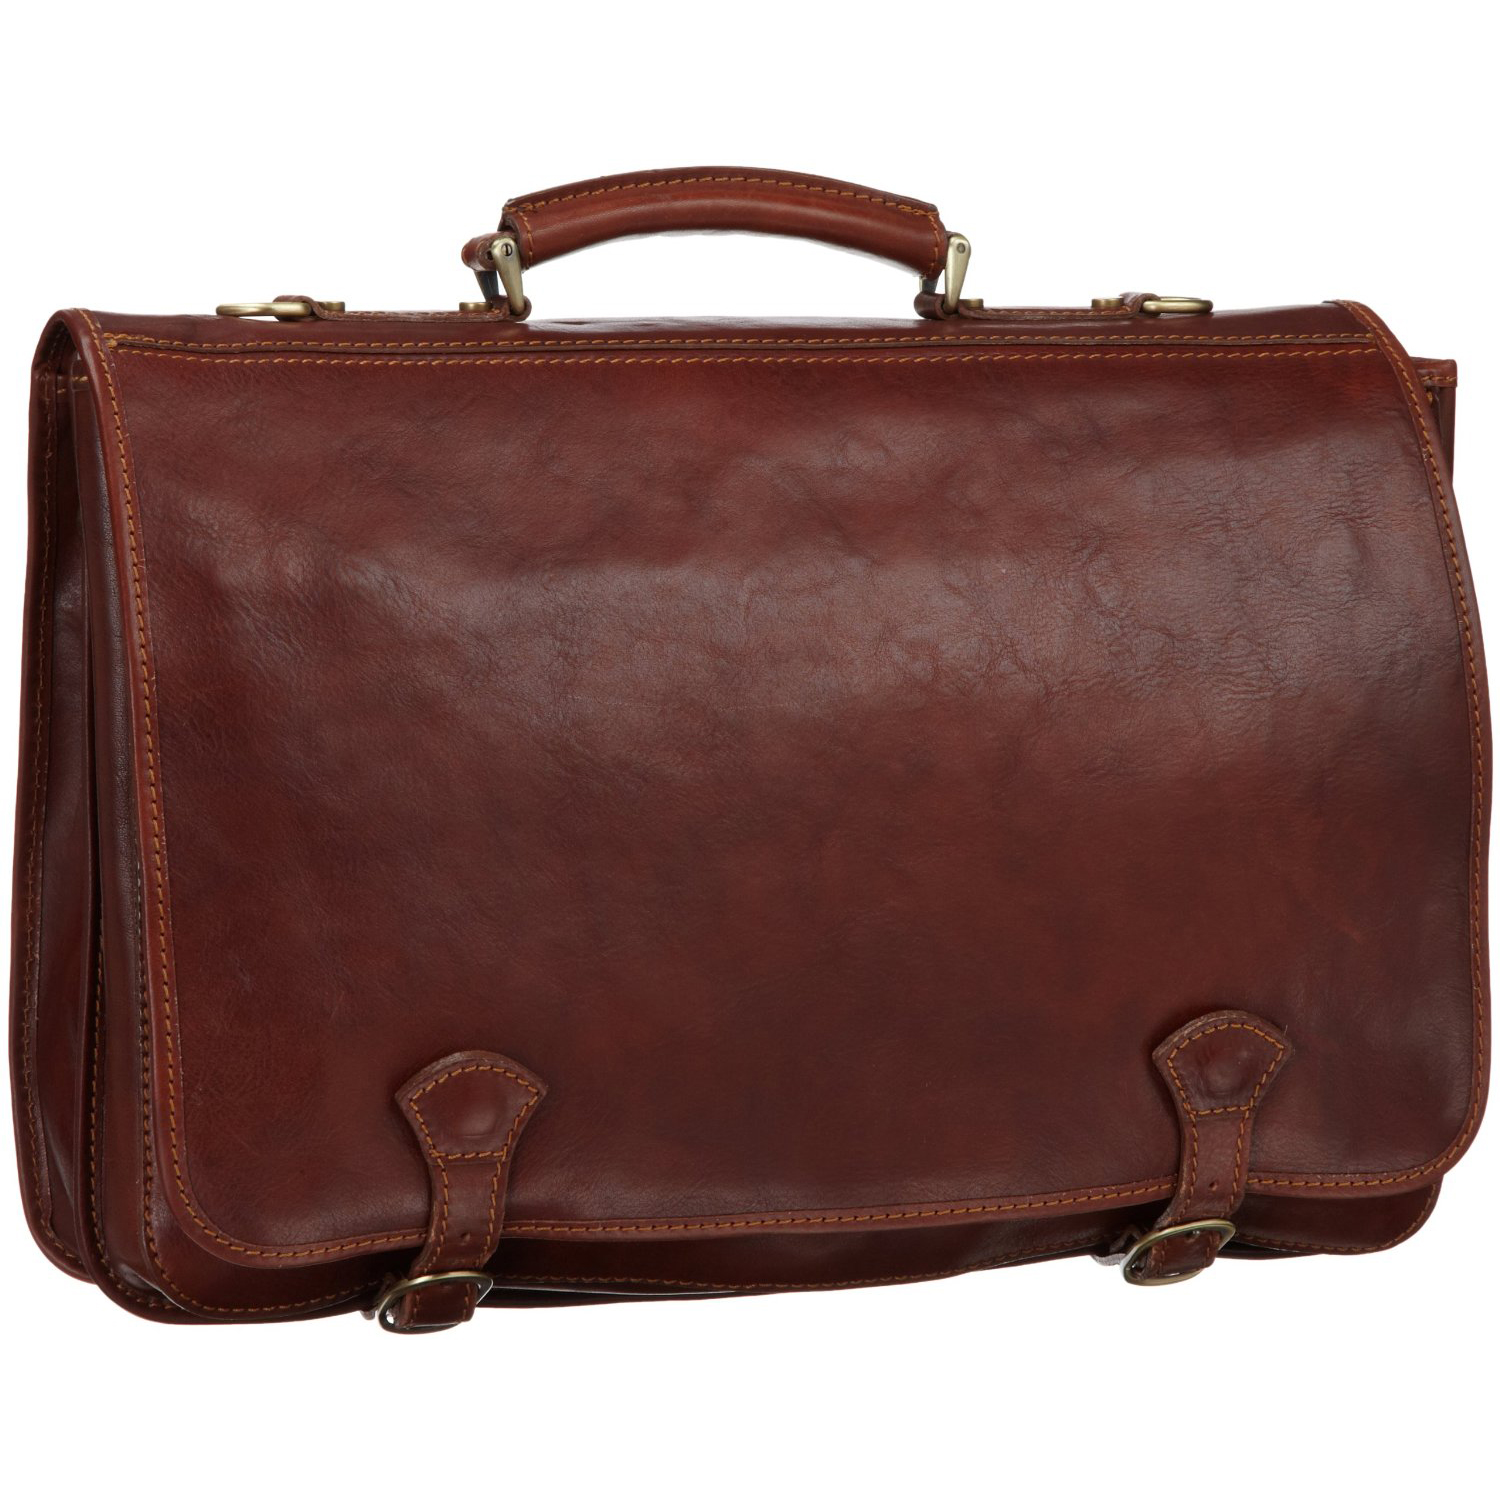 Floto Luggage Piazza Messenger Bag, Brown, One Size  $188.00(46%off)+ Free Shipping 